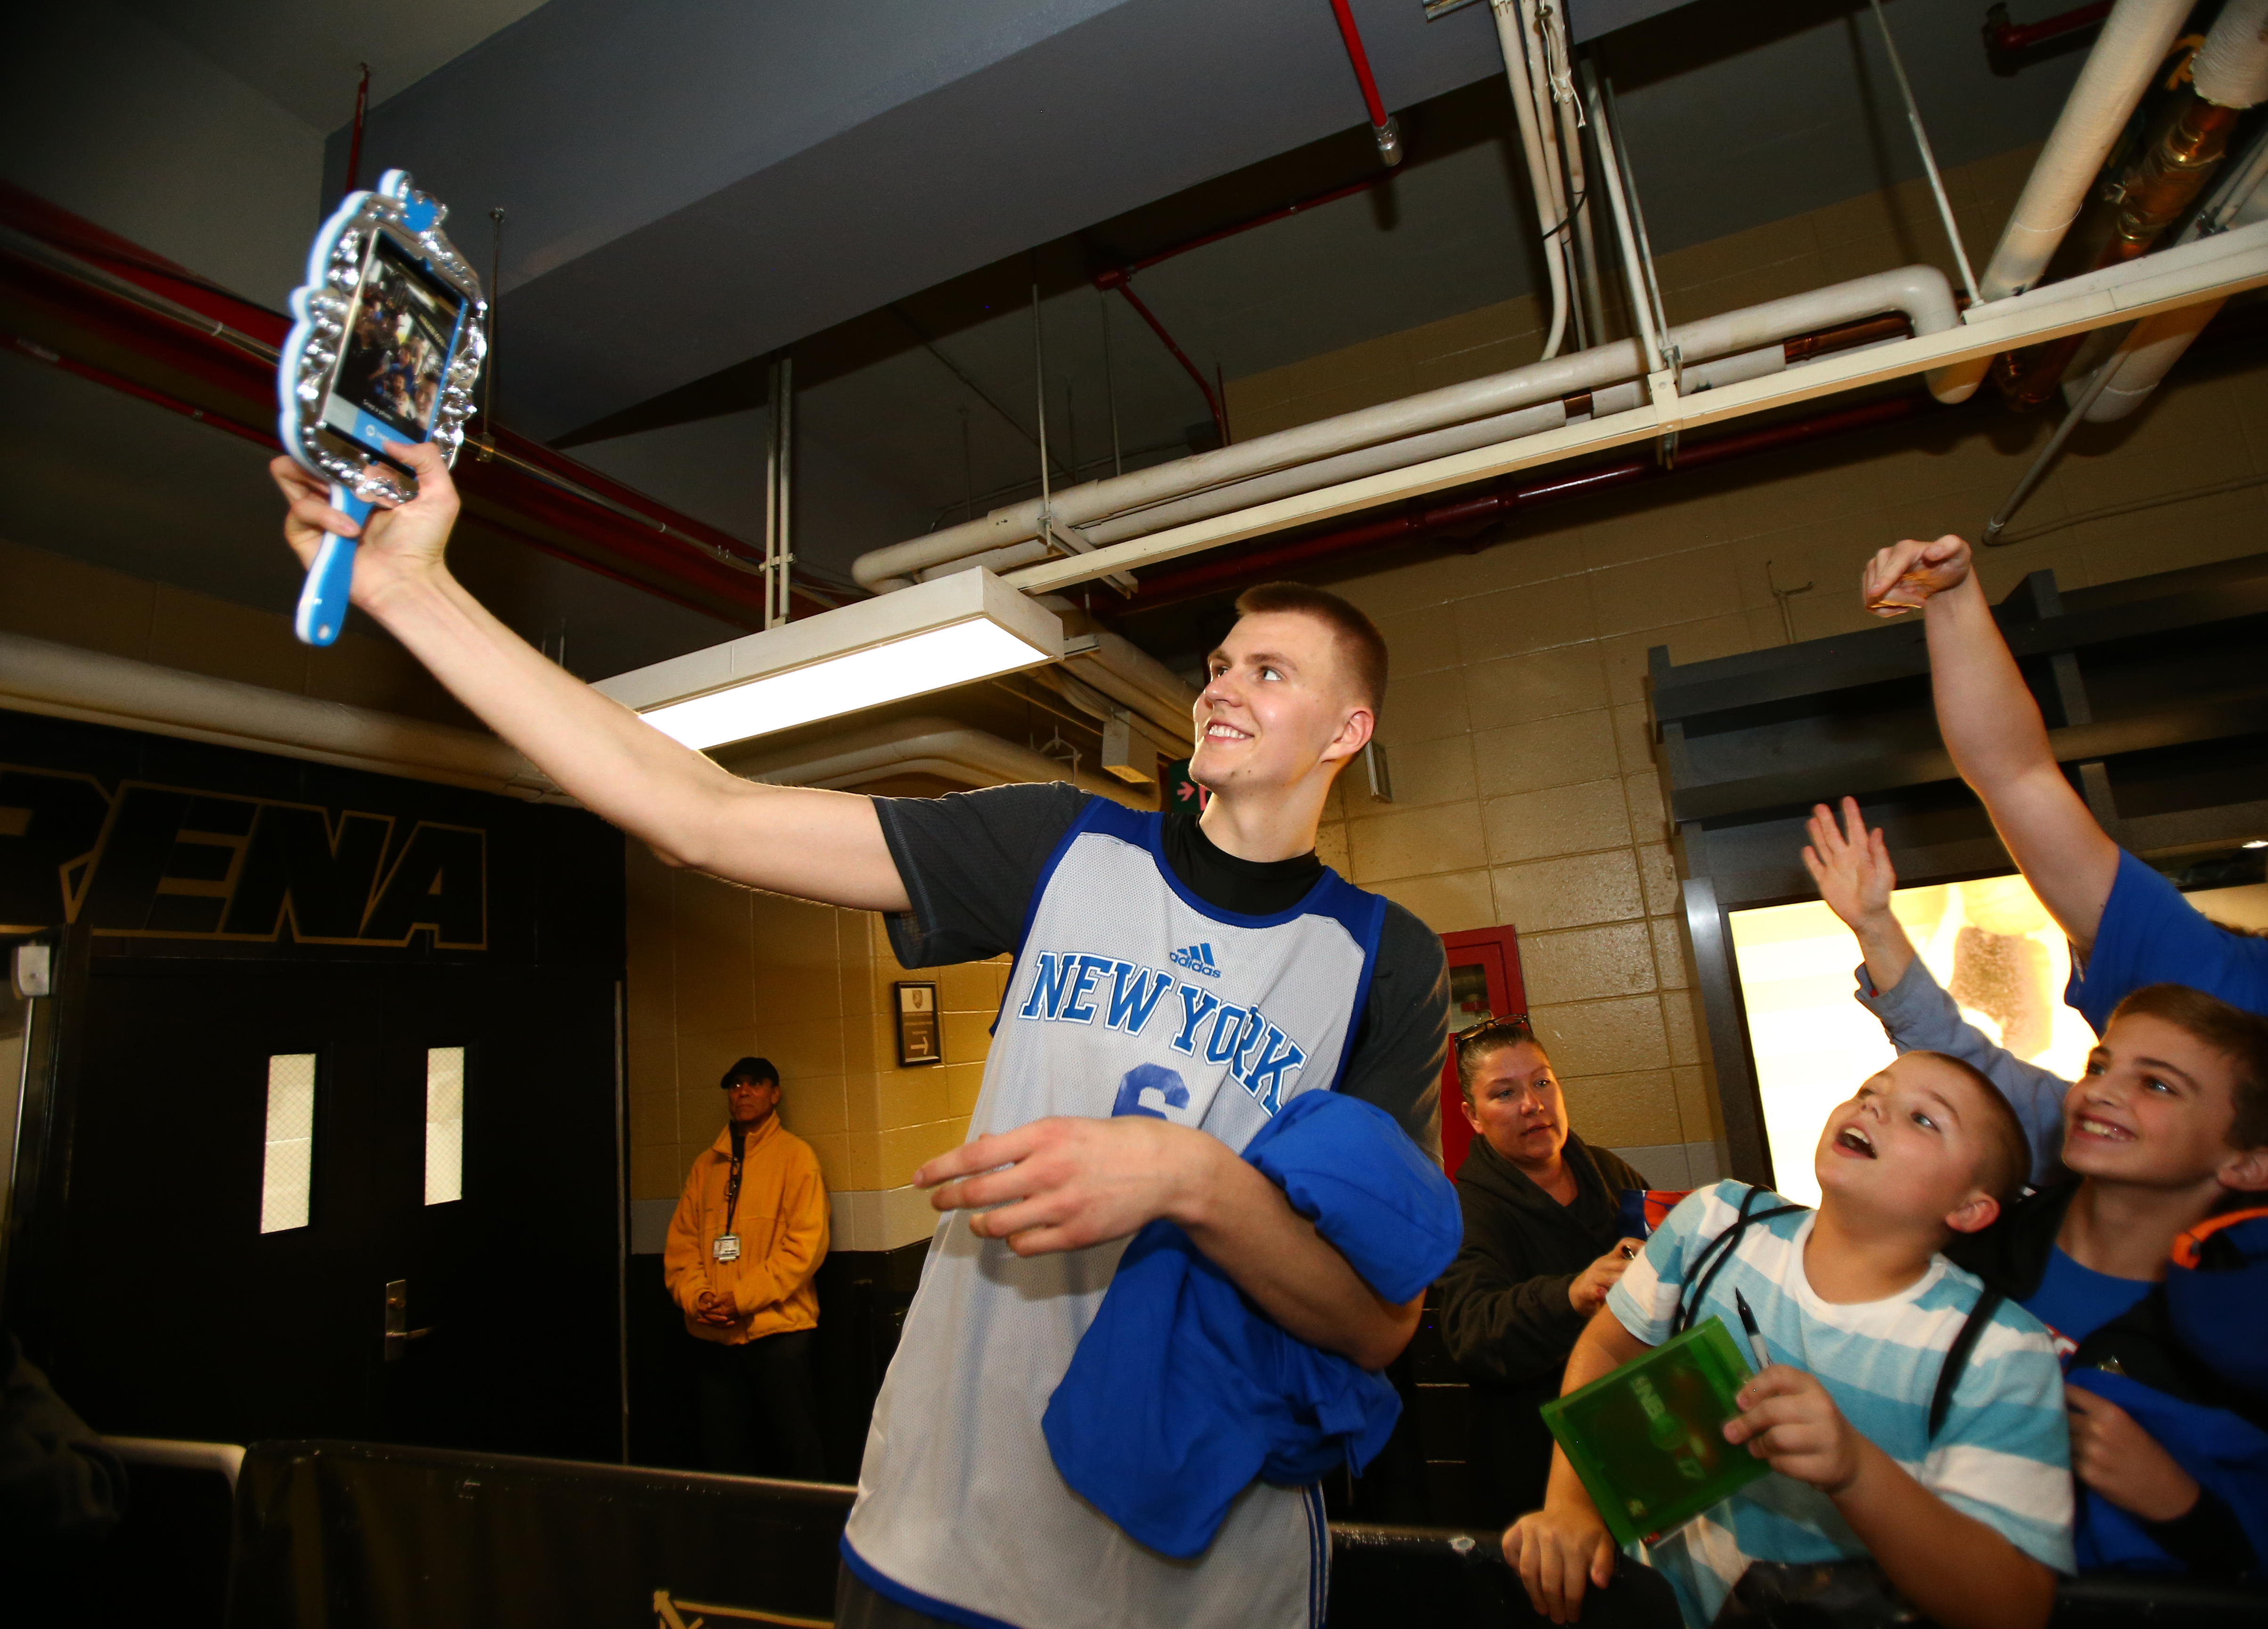 WEST POINT, NY - SEPTEMBER 30: Kristaps Porzingis #6 of the New York Knicks takes a picture with some fans during training camp practice on September 30, 2016 at The U.S. Military Academy at West Point in West Point, New York. NOTE TO USER: User expressly acknowledges and agrees that, by downloading and or using this Photograph, user is consenting to the terms and conditions of the Getty Images License Agreement. Mandatory Copyright Notice: Copyright 2016 NBAE (Photo by Nathaniel S. Butler/NBAE via Getty Images)